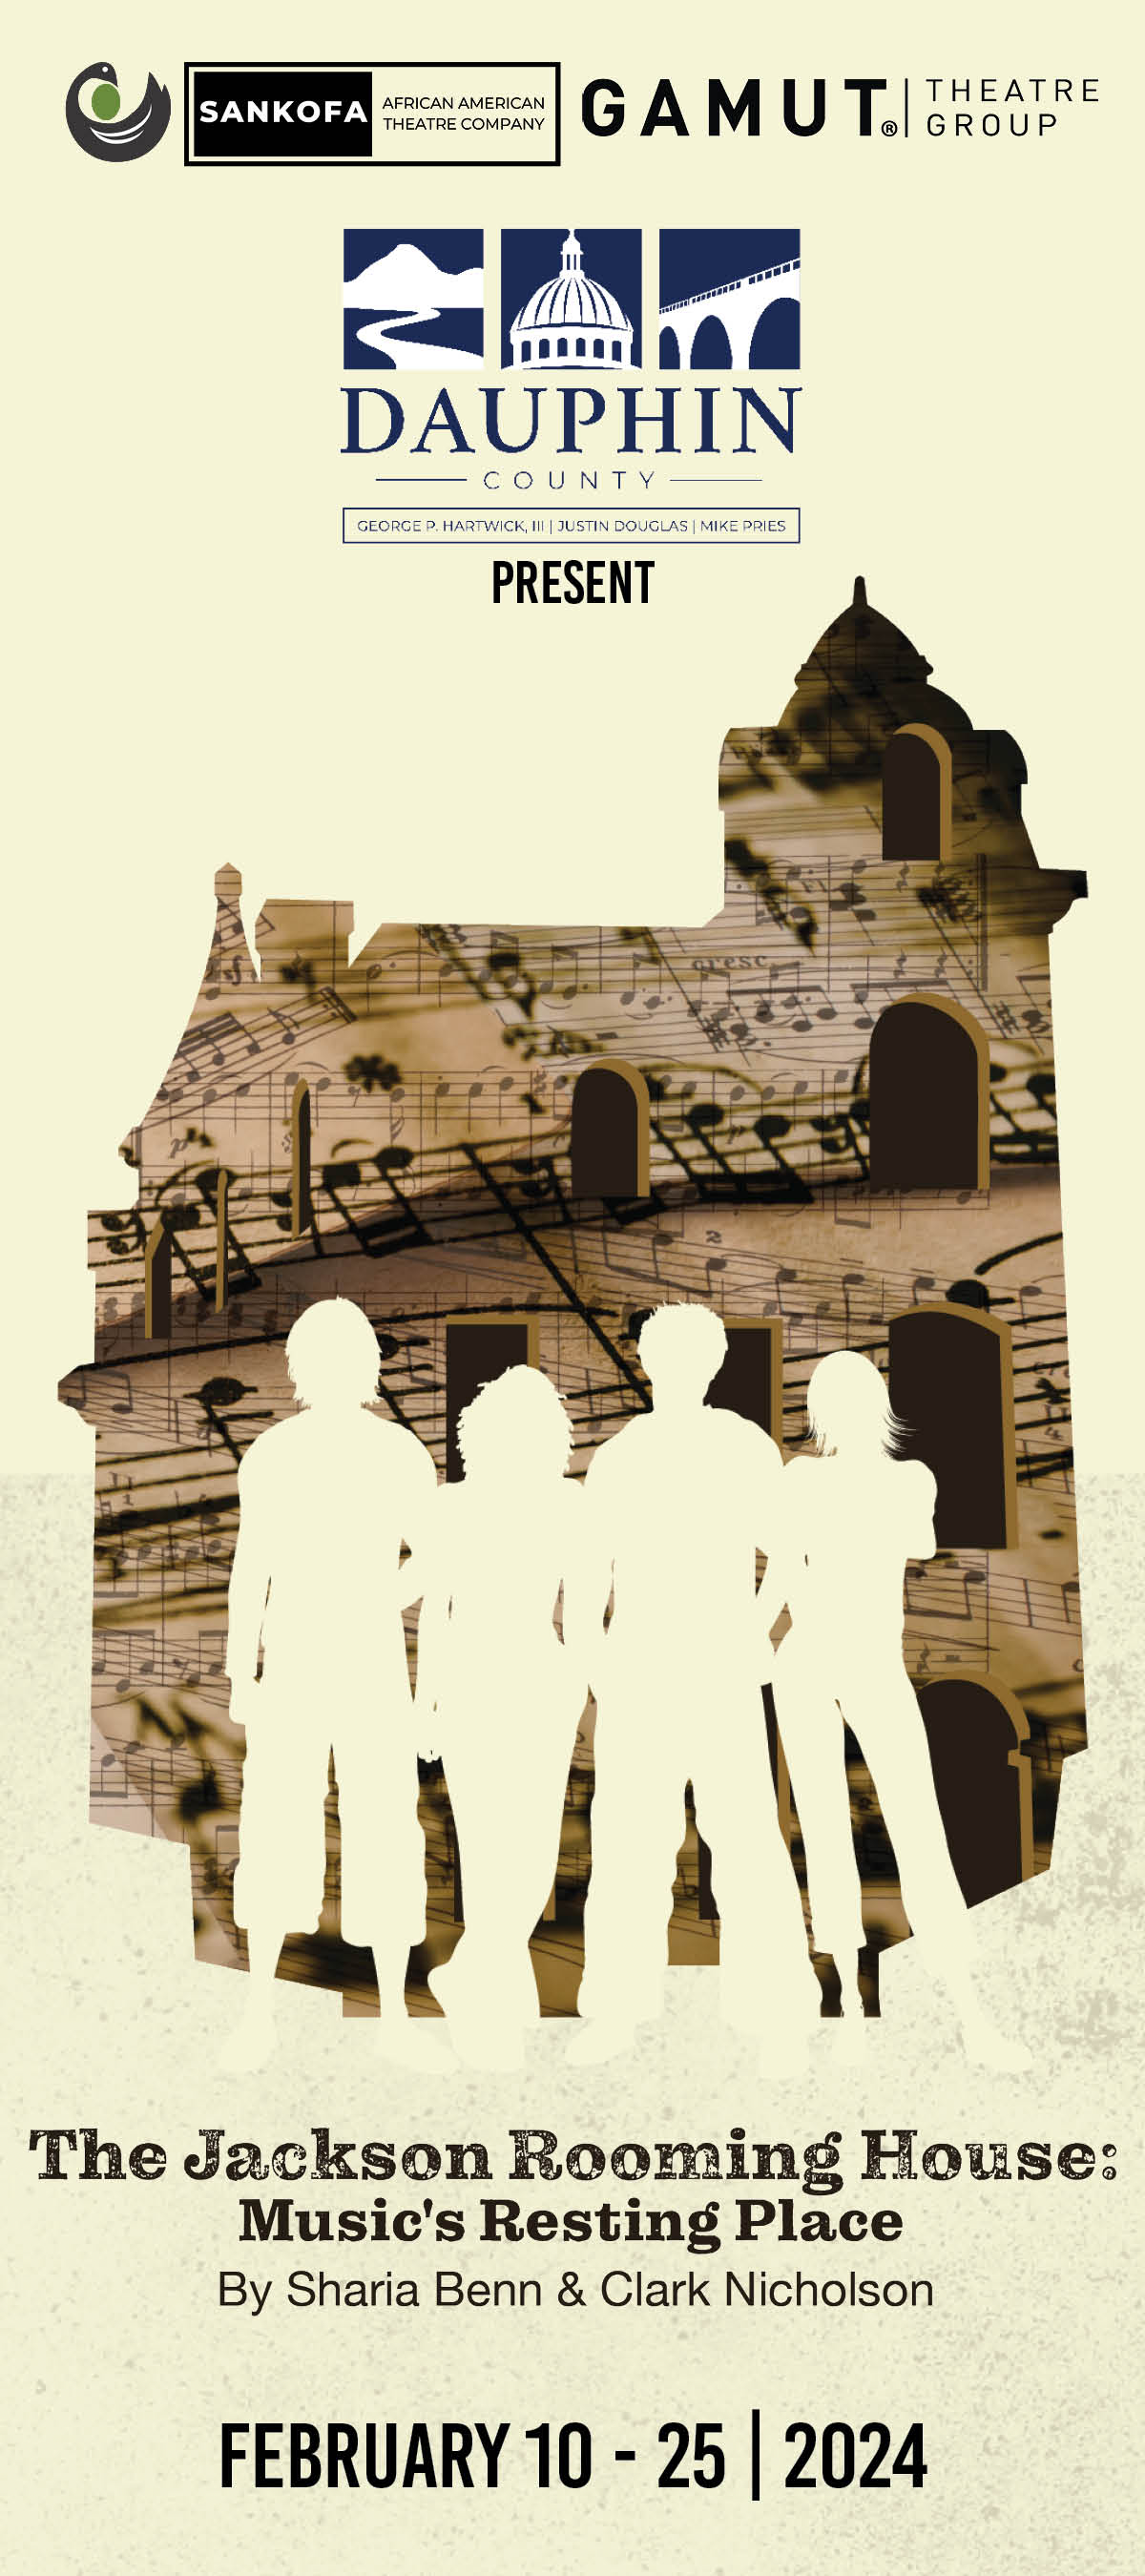 The Jackson Rooming House: Music's Resting Place | February 10-25, 2024